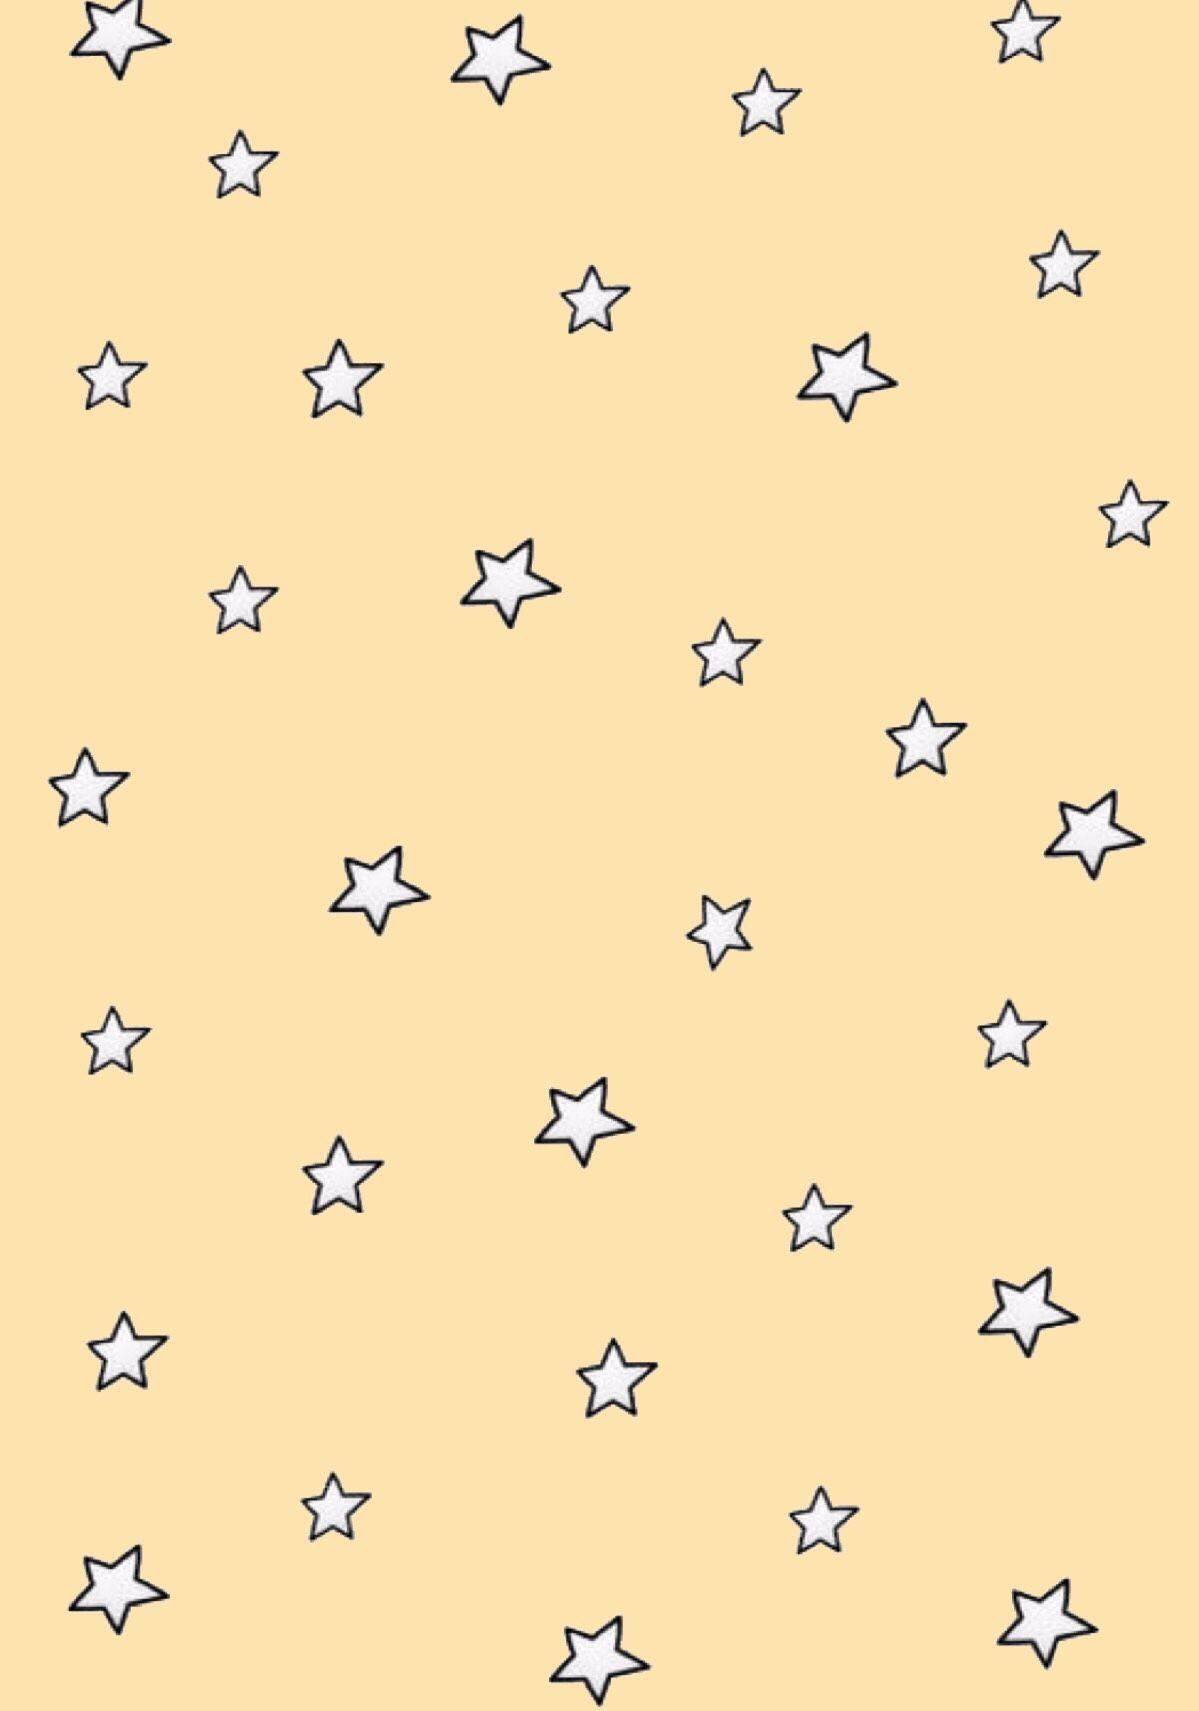 Aesthetic Star Wallpapers Top Free Aesthetic Star Backgrounds